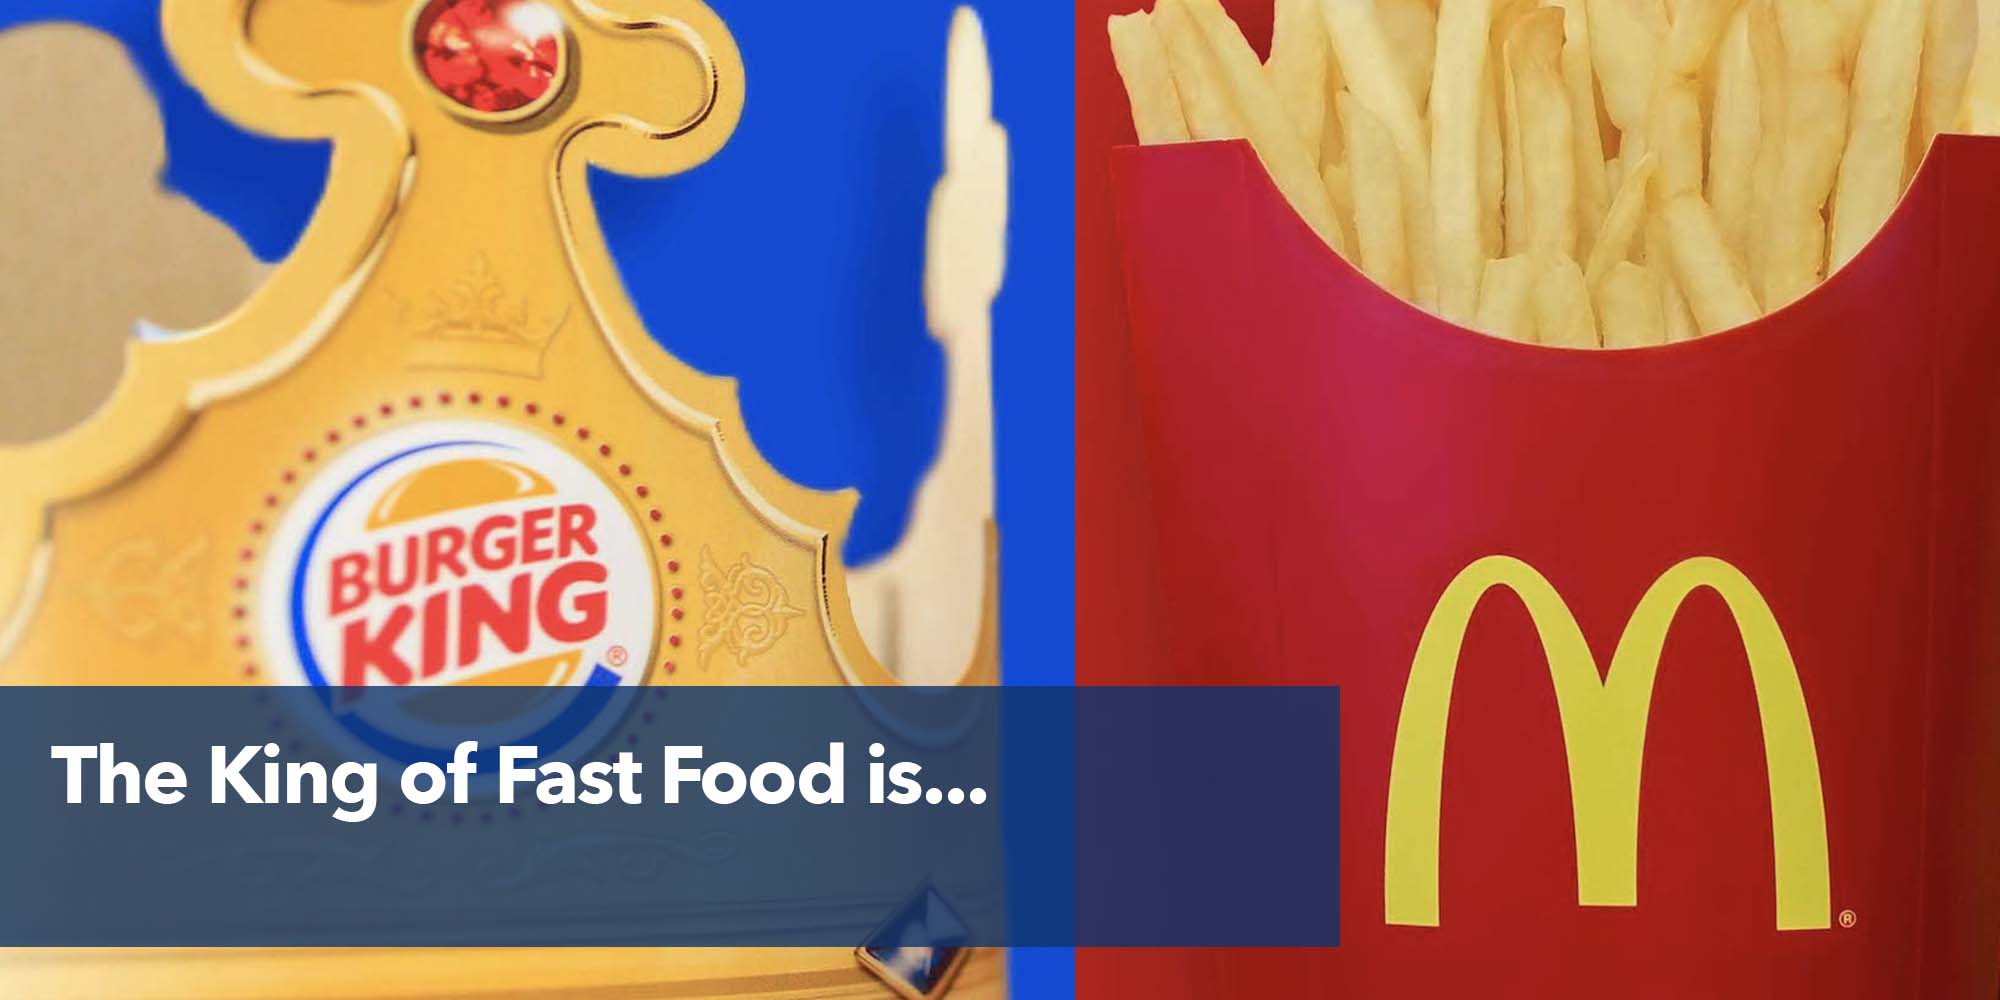 The King of Fast Food is…